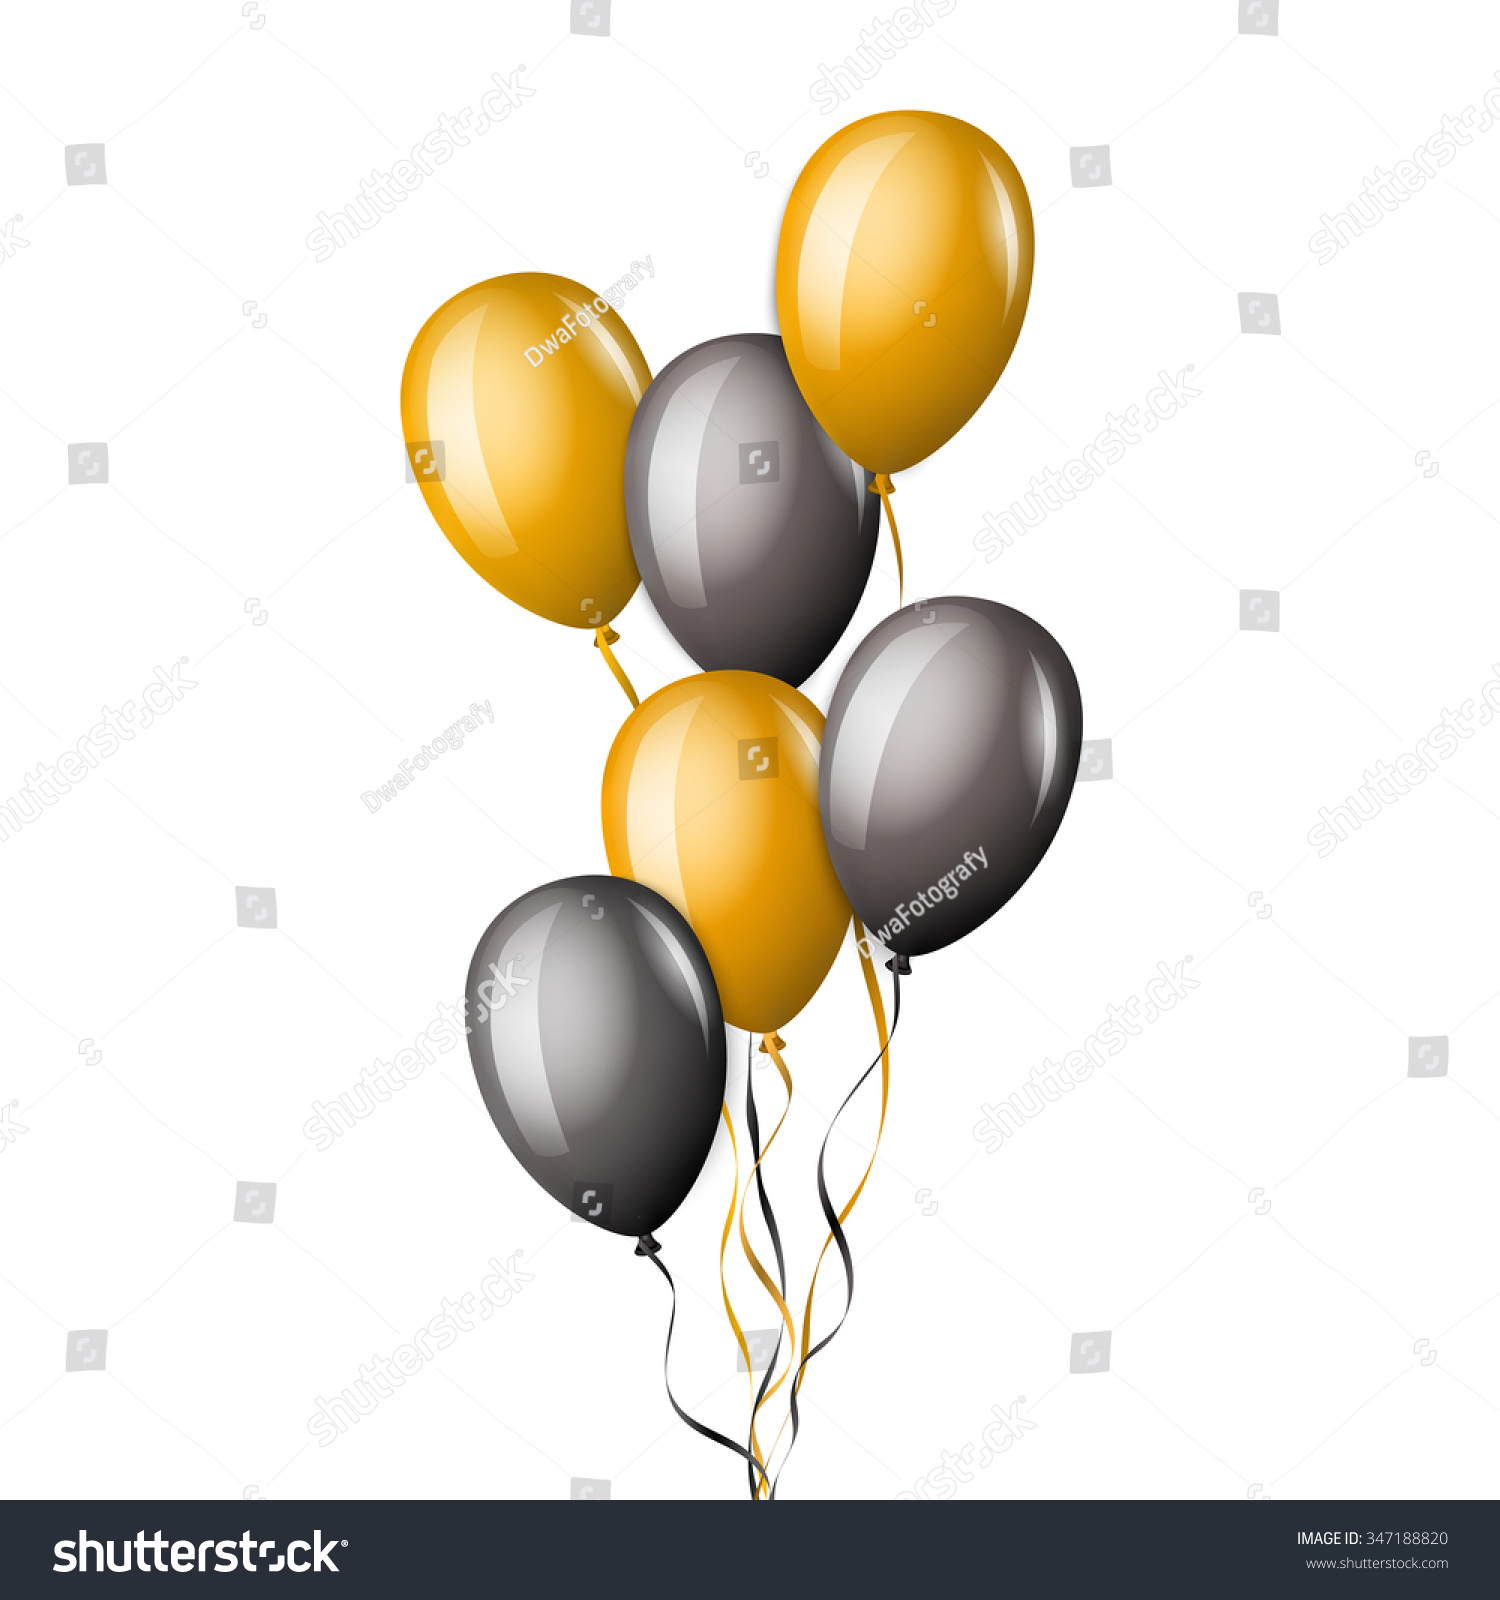 Bunch Of Balloons In Different Colors. Stock Vector Illustration ...